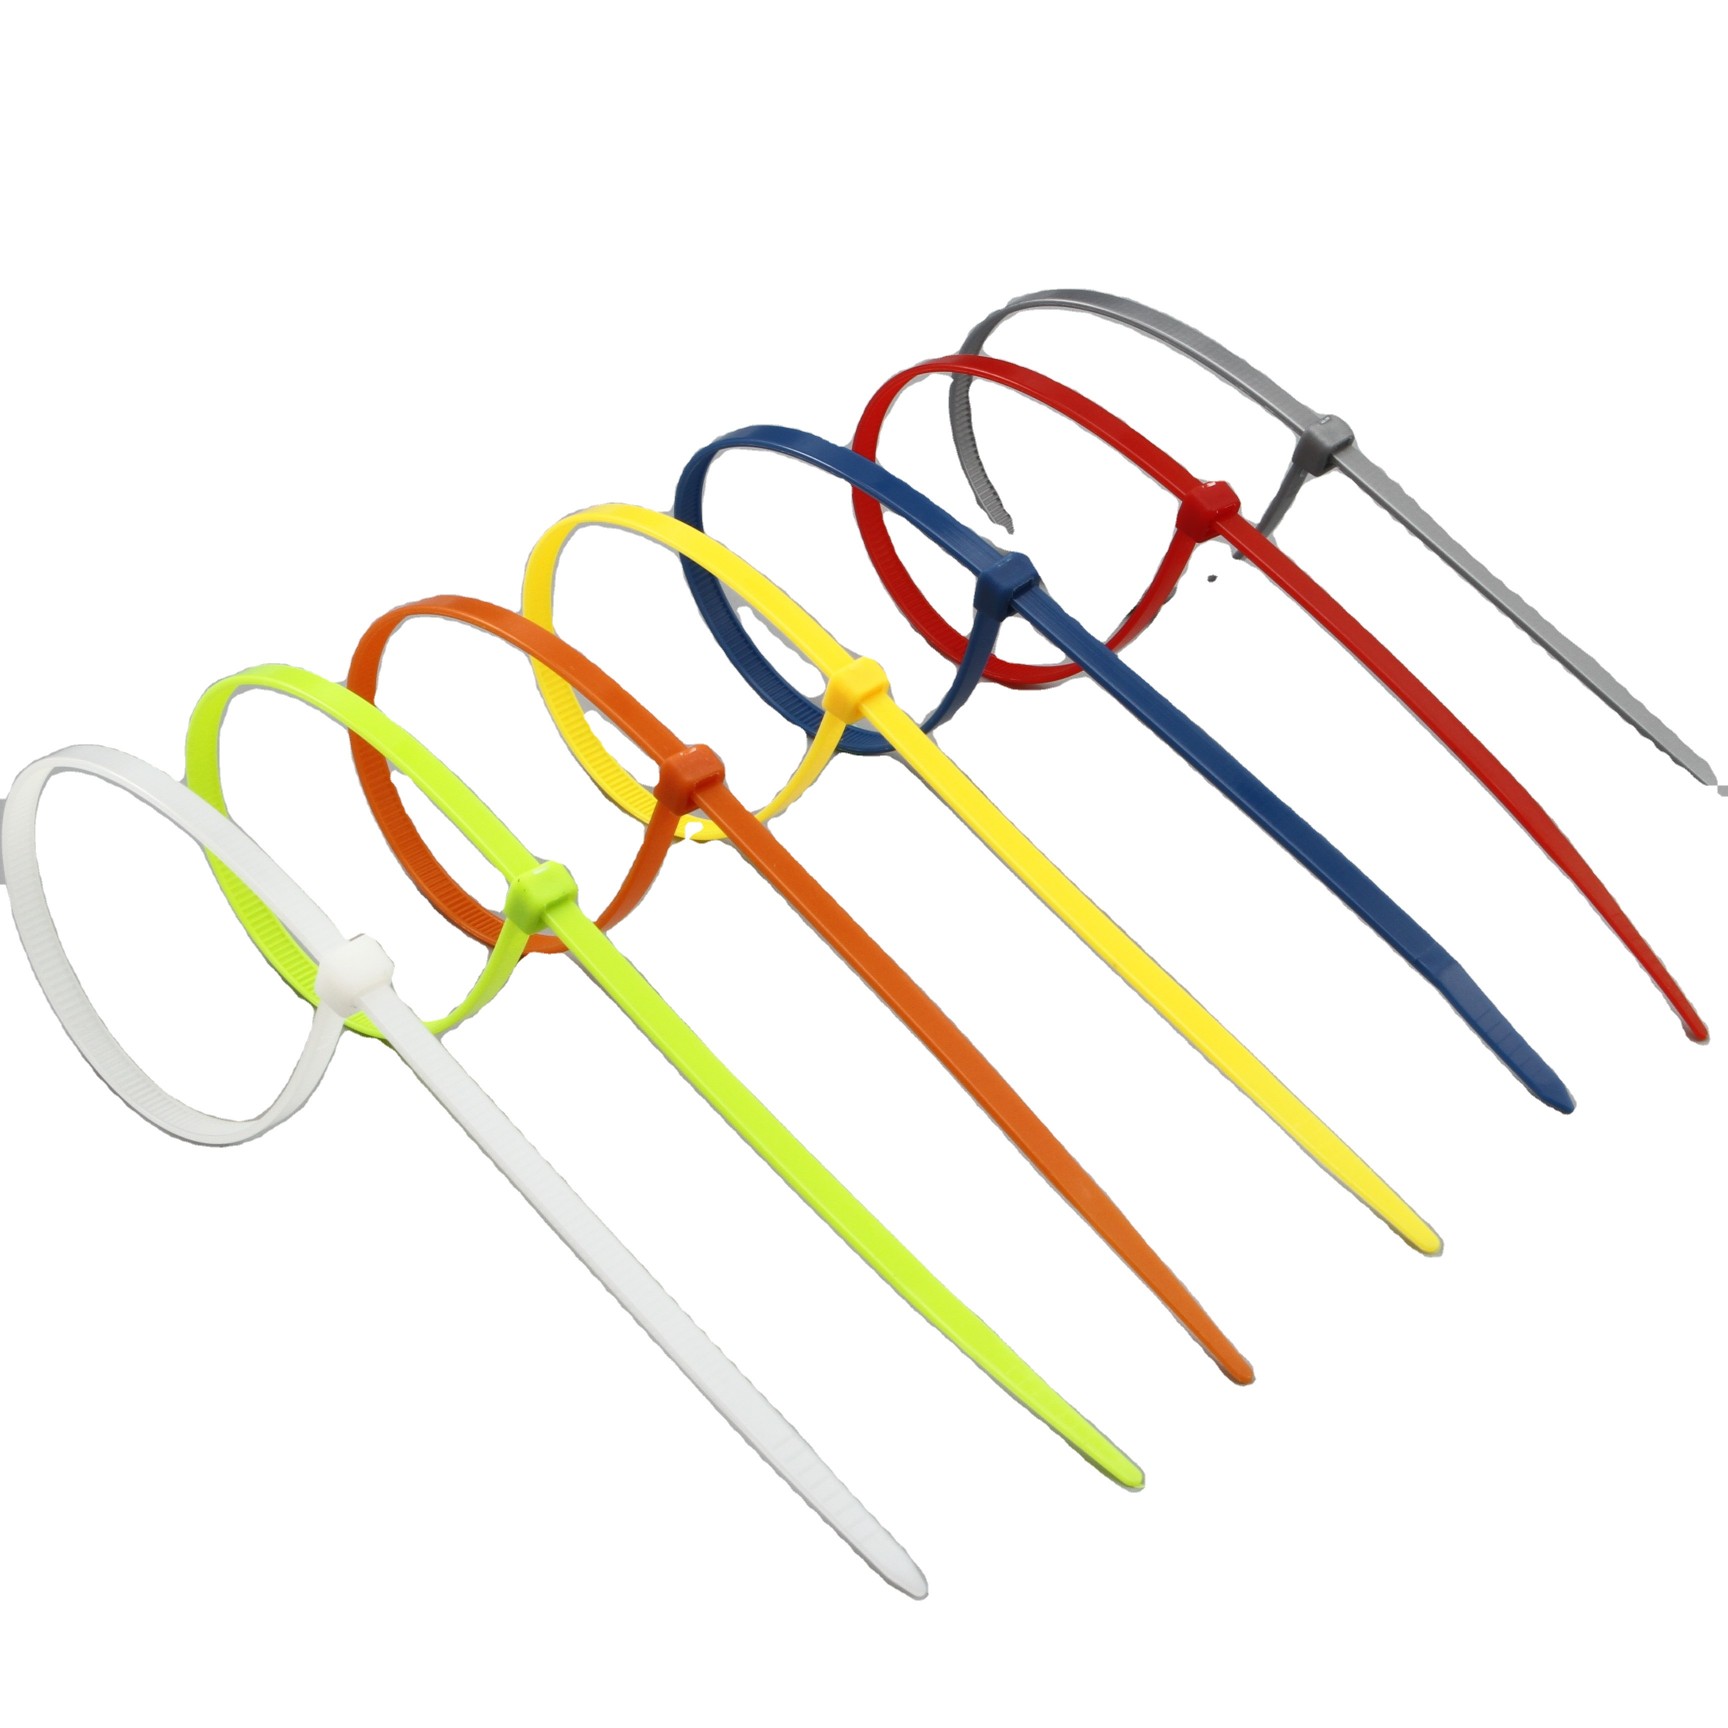 Label cable ties - 4 